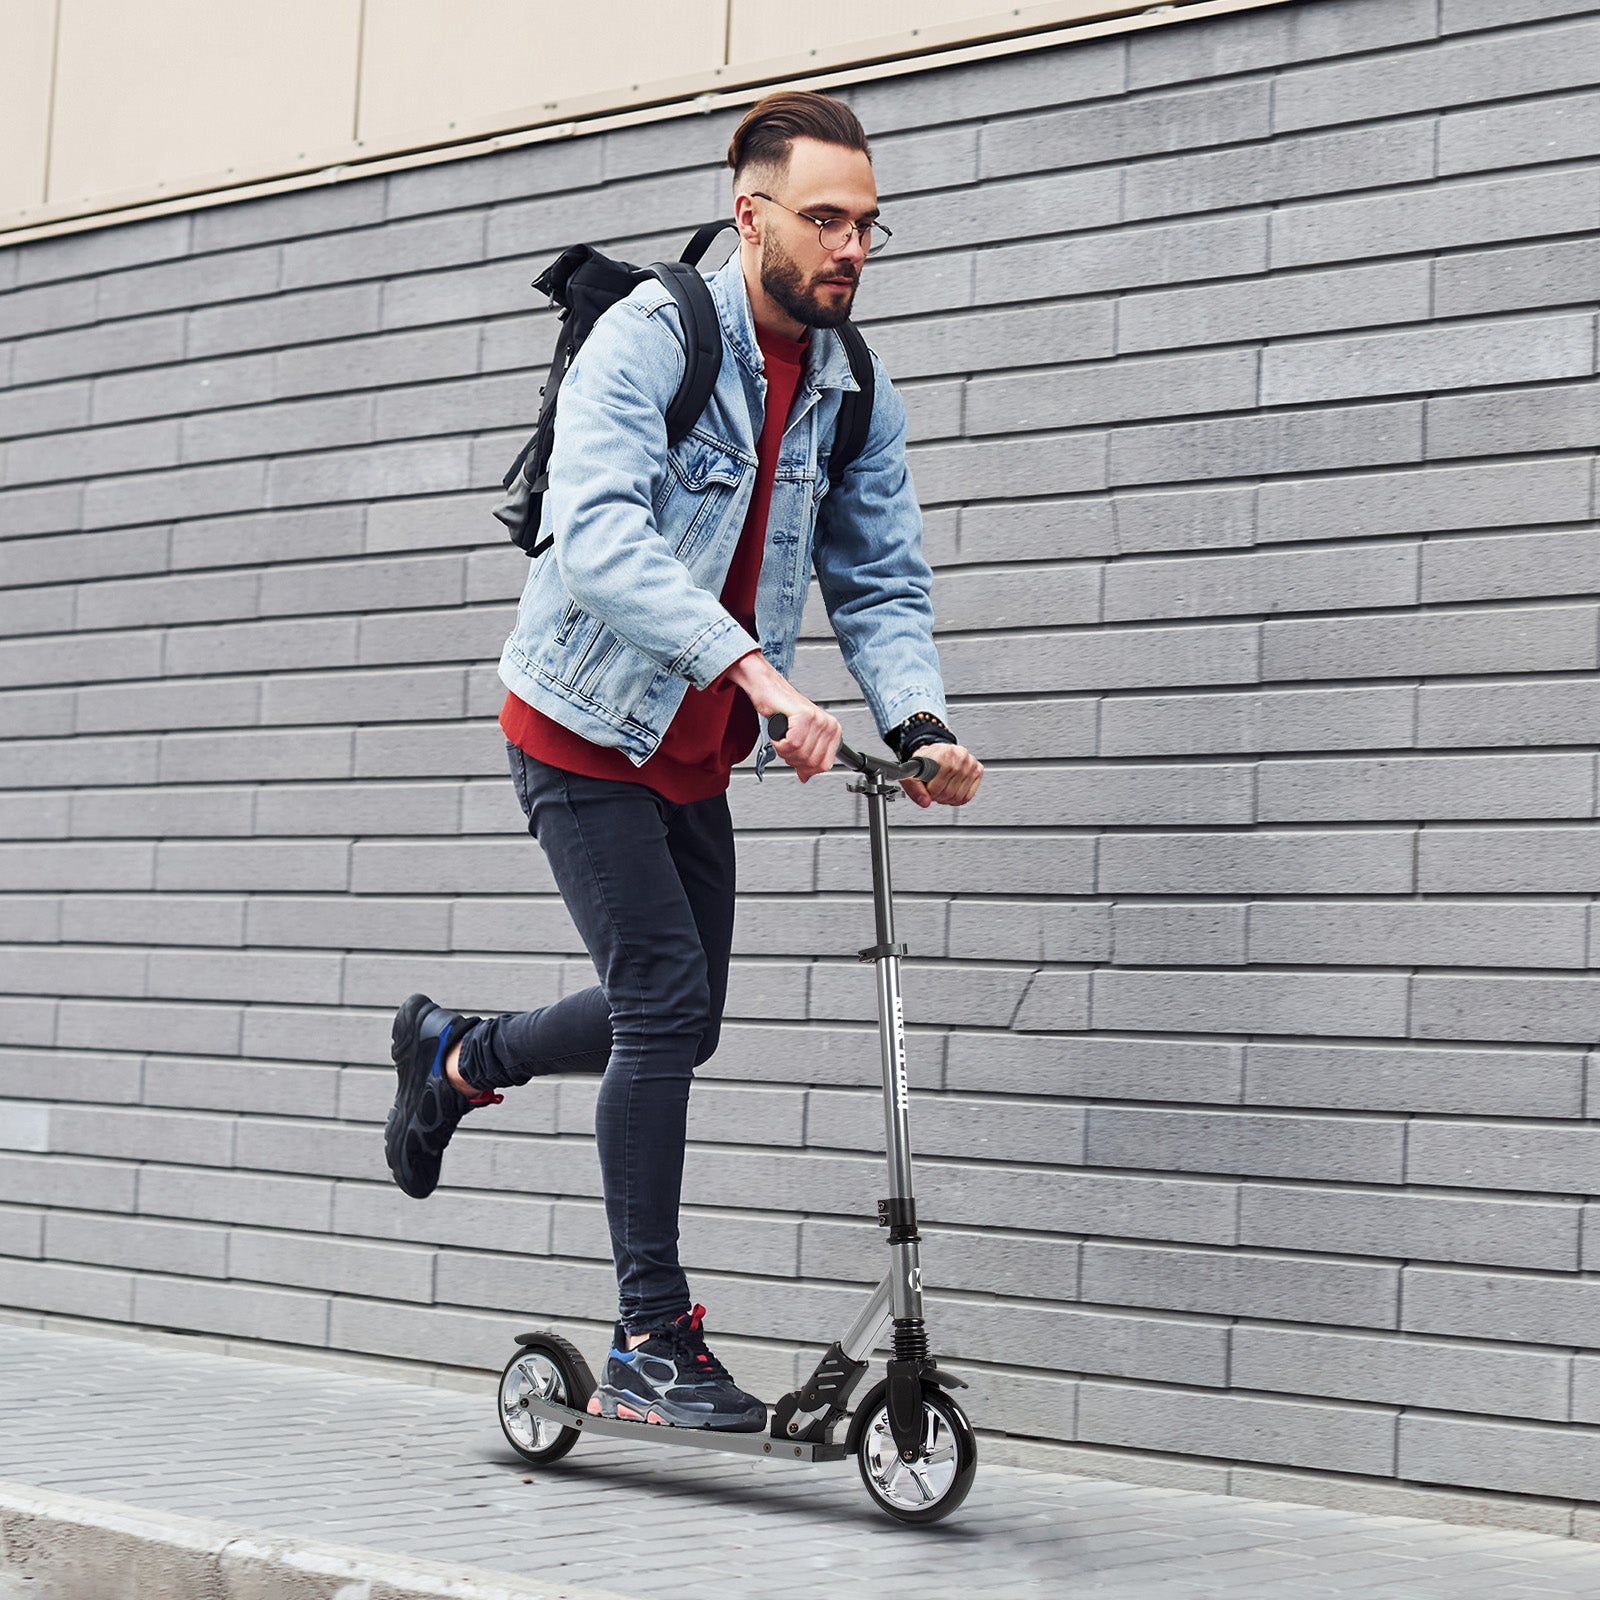 Foldable-Scooter-Adjustable-Handlebar-Height-with-Kickstand-180-mm-Wheels-Stable-Aluminum-Scooter-for-Adults-and-Teenagers-up-to-100-kg-Gray